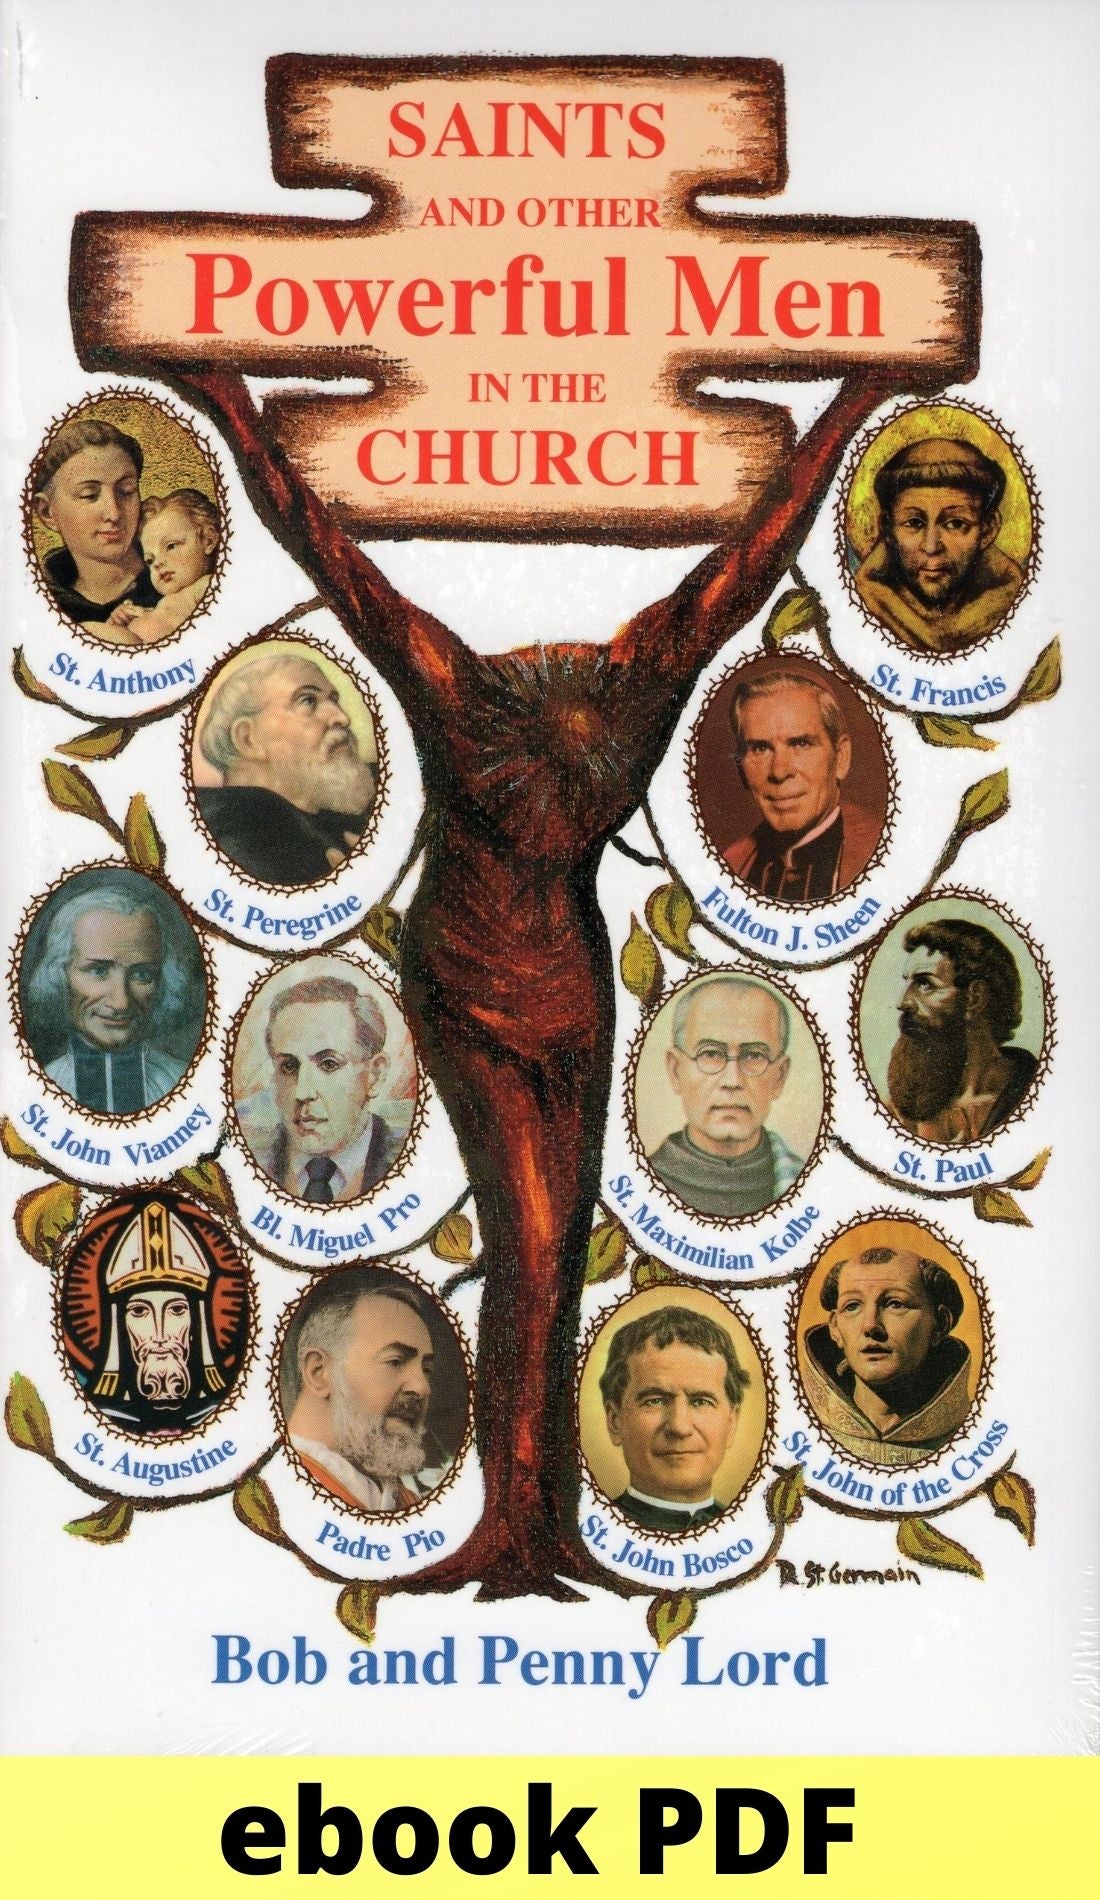 Saints and Other Powerful Men in the Church ebook PDF - Bob and Penny Lord